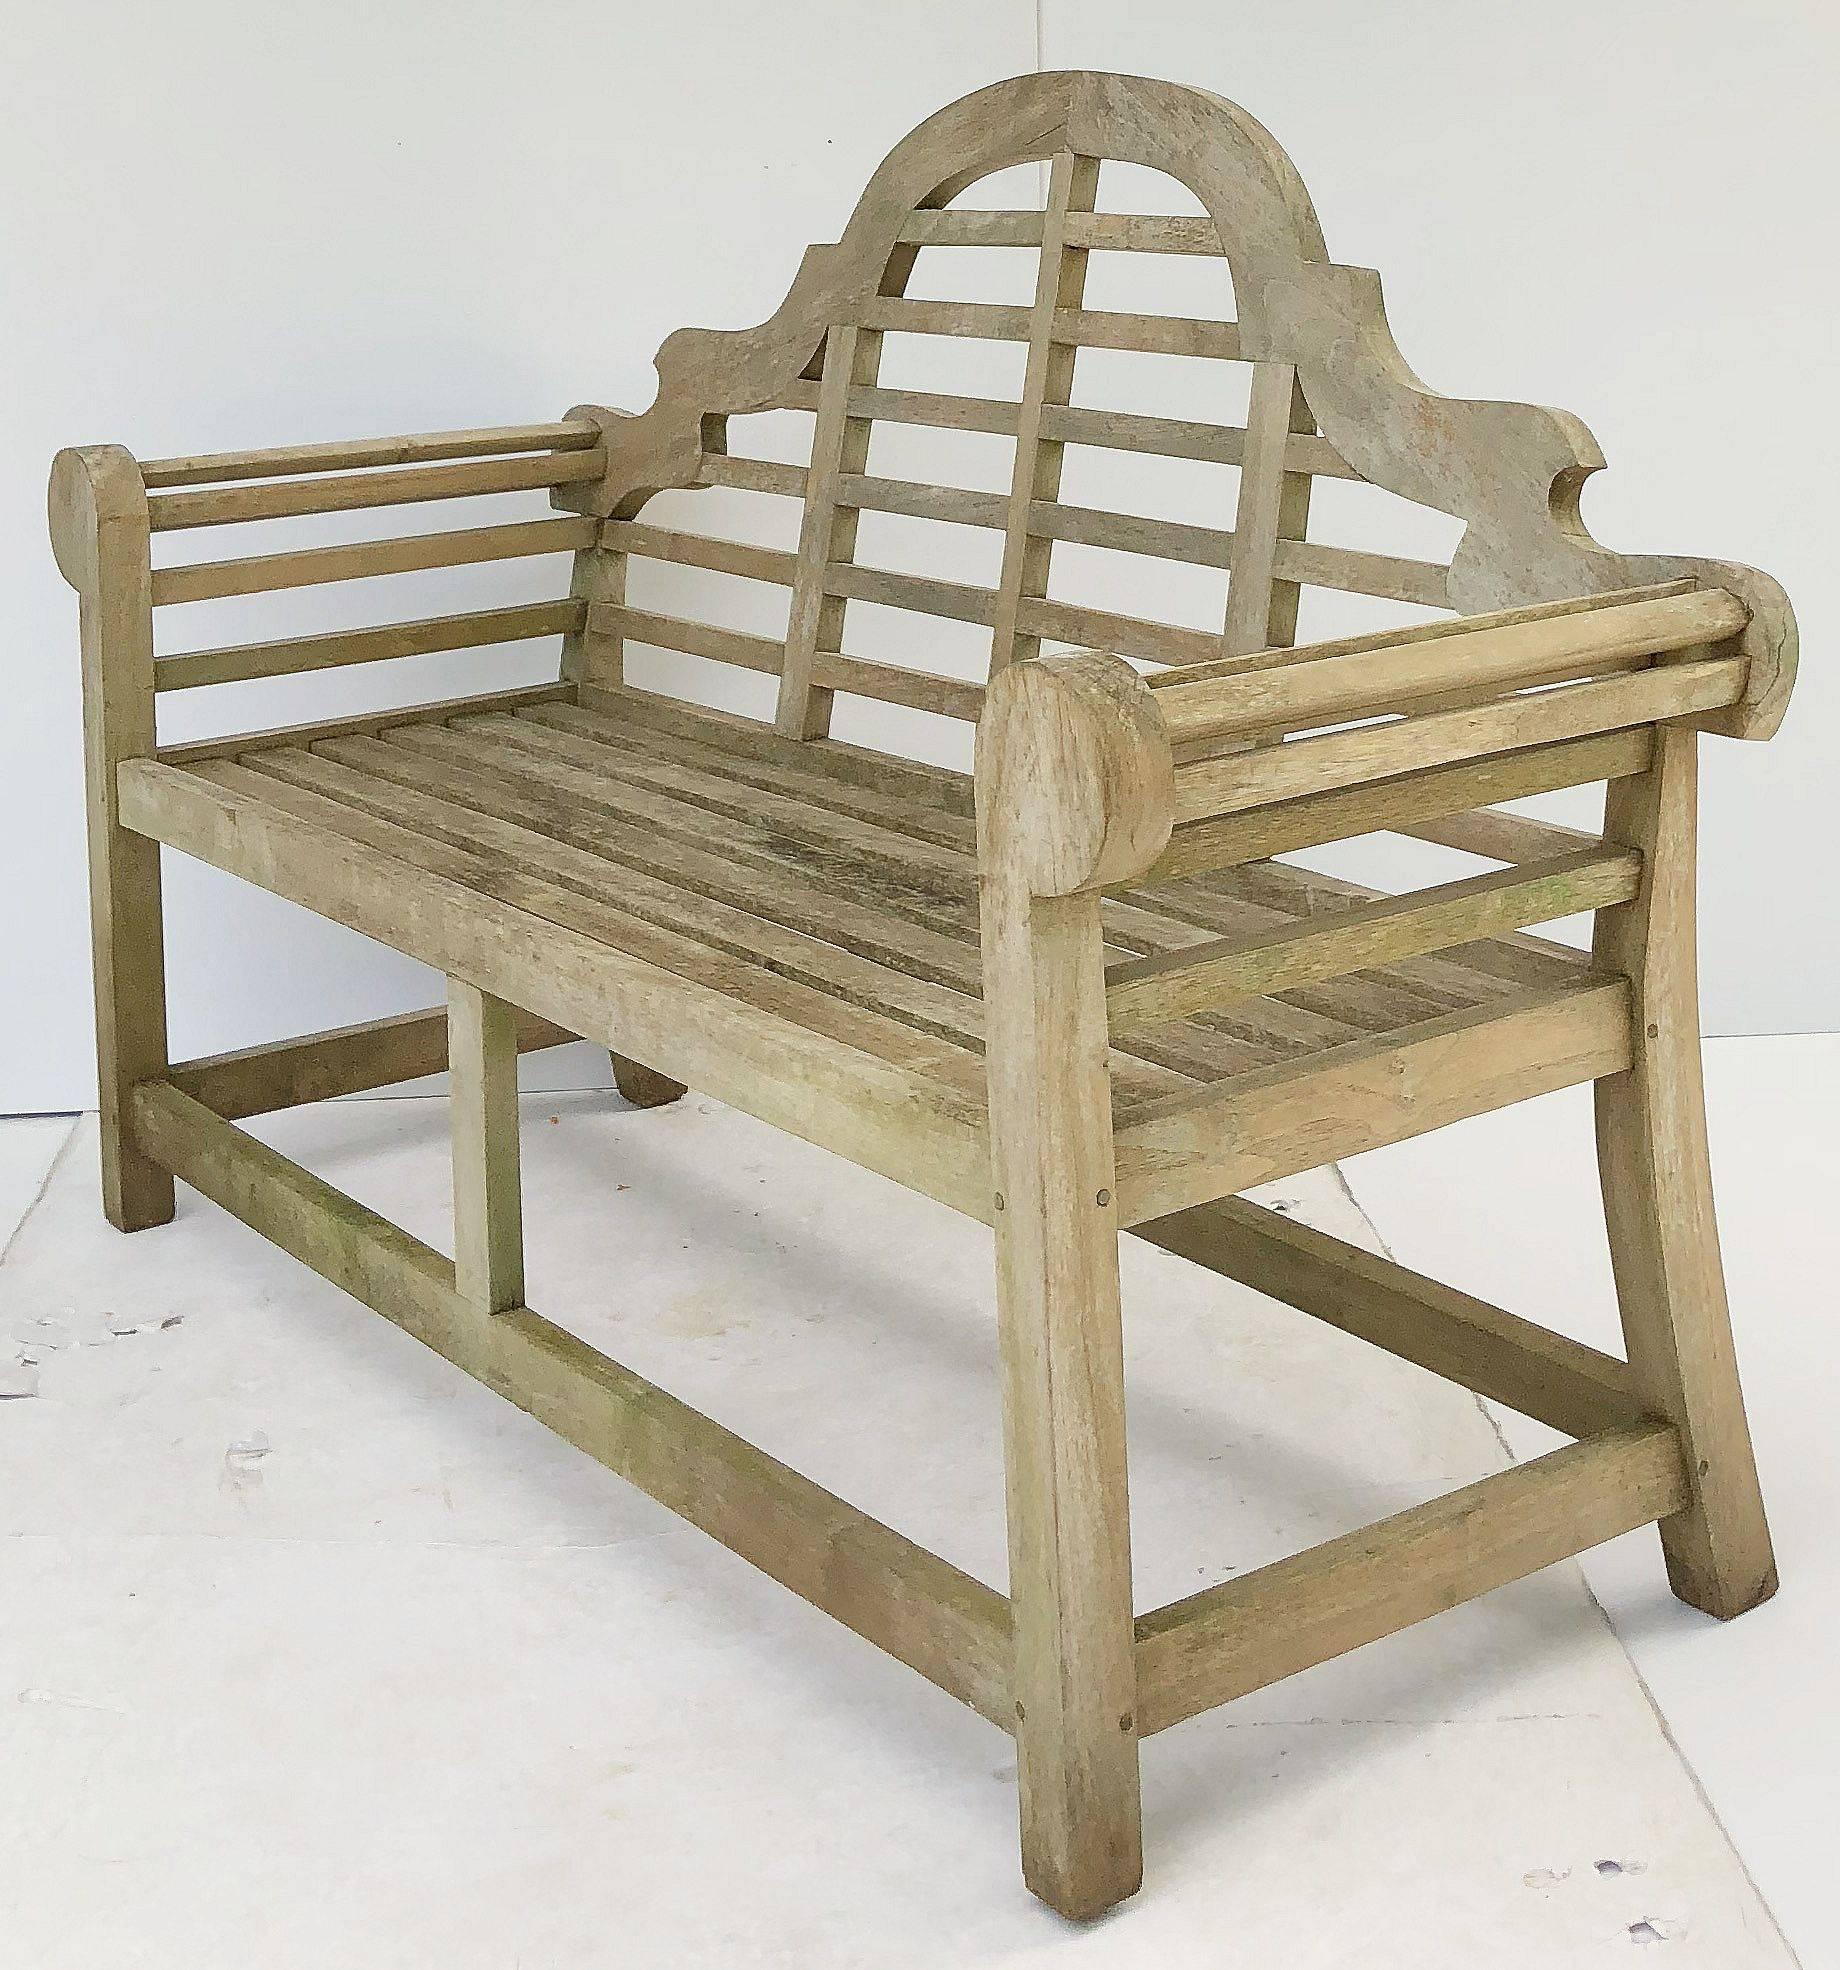 20th Century Lutyens Style Garden Bench Seats of Teak from England 'Individually Priced'